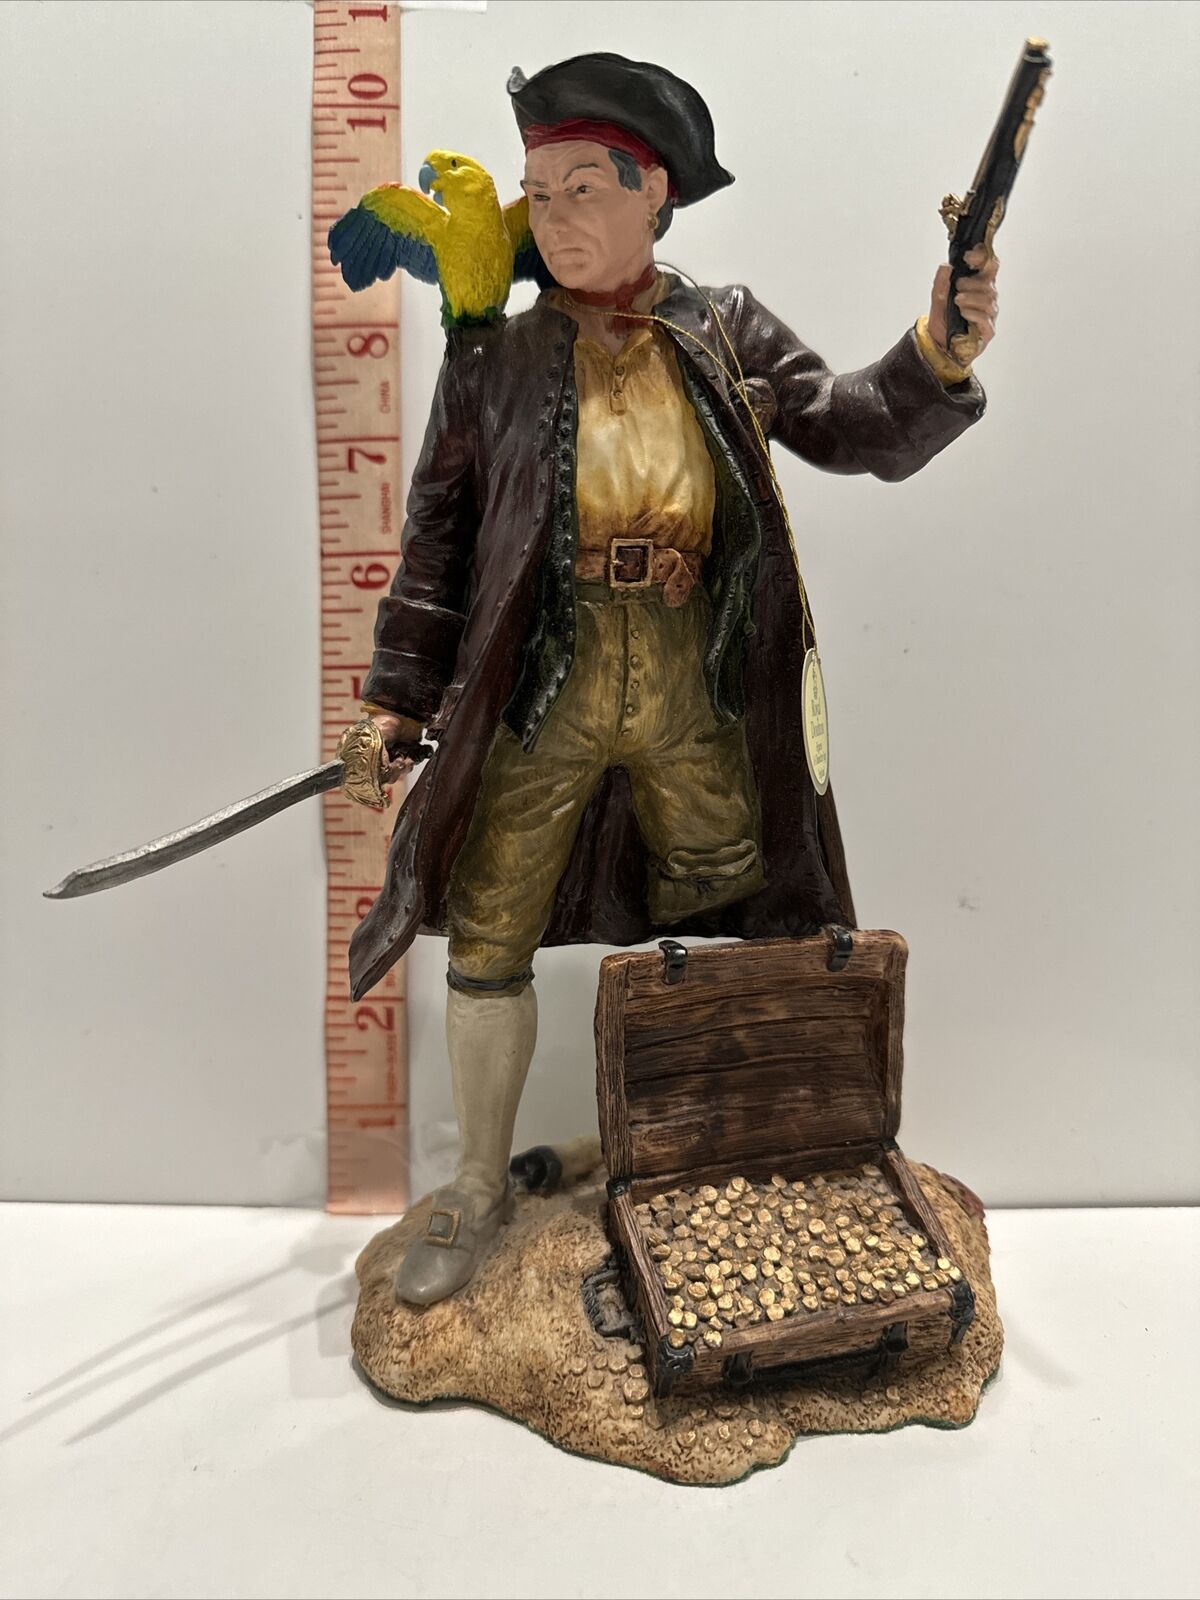 Vintage Royal Doulton Long John Silver Pirate Figurine Resin Hand-Painted 1990s